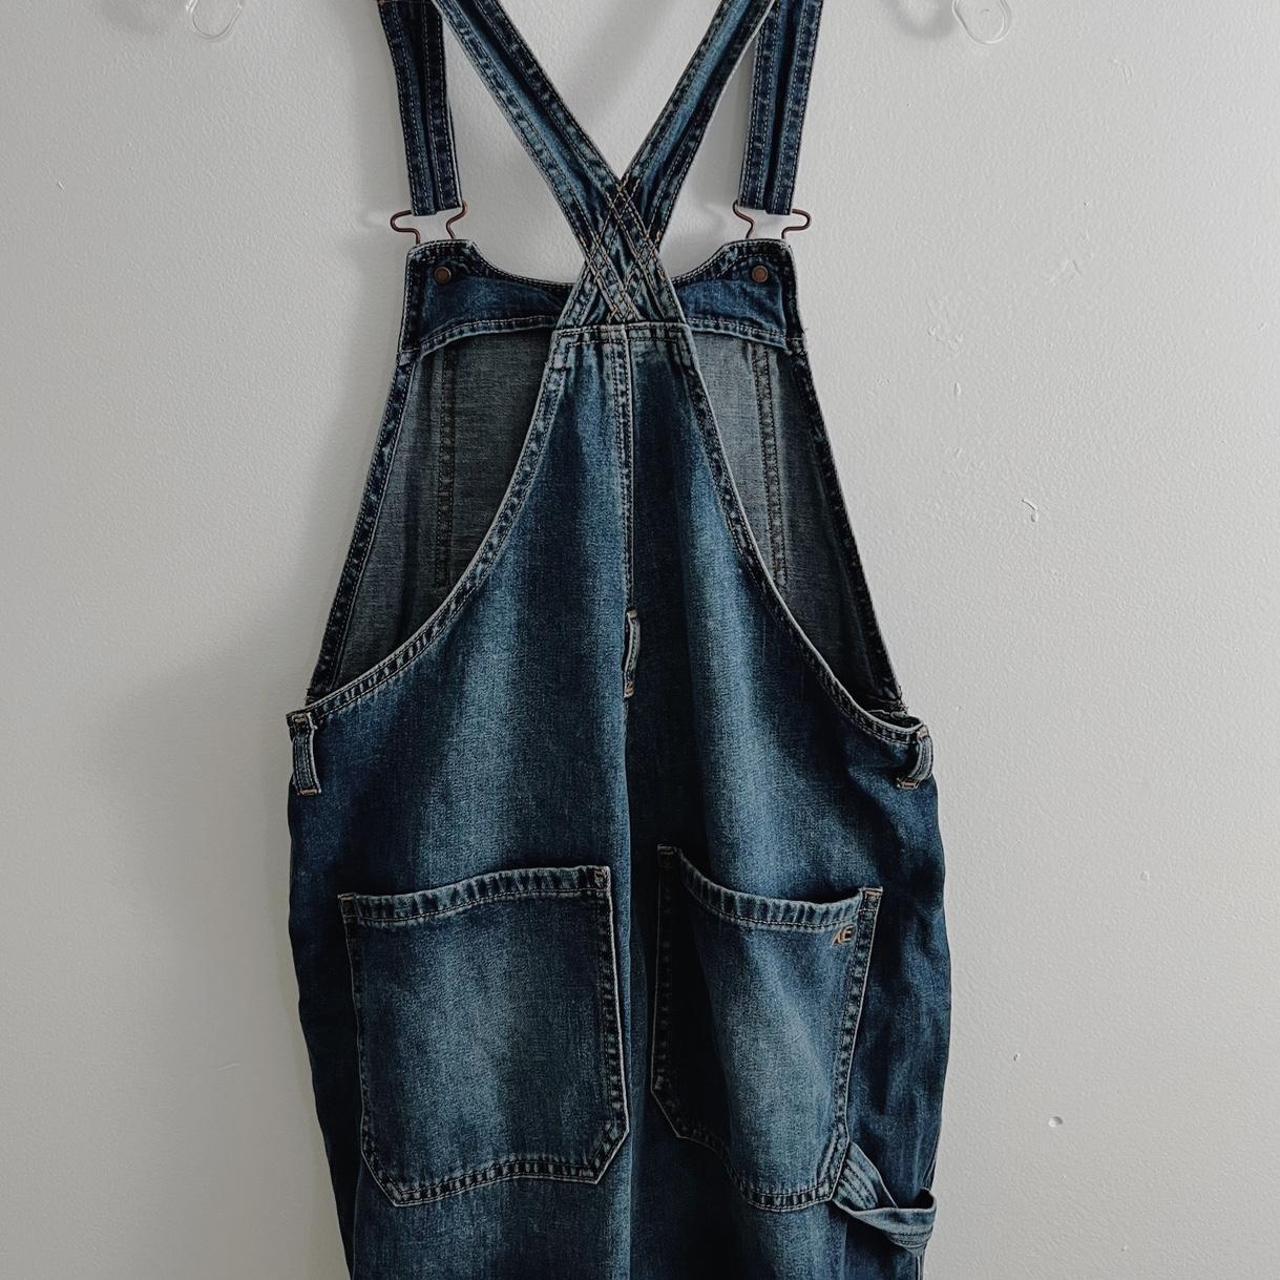 American Eagle Women's Navy and Blue Dungarees-overalls | Depop